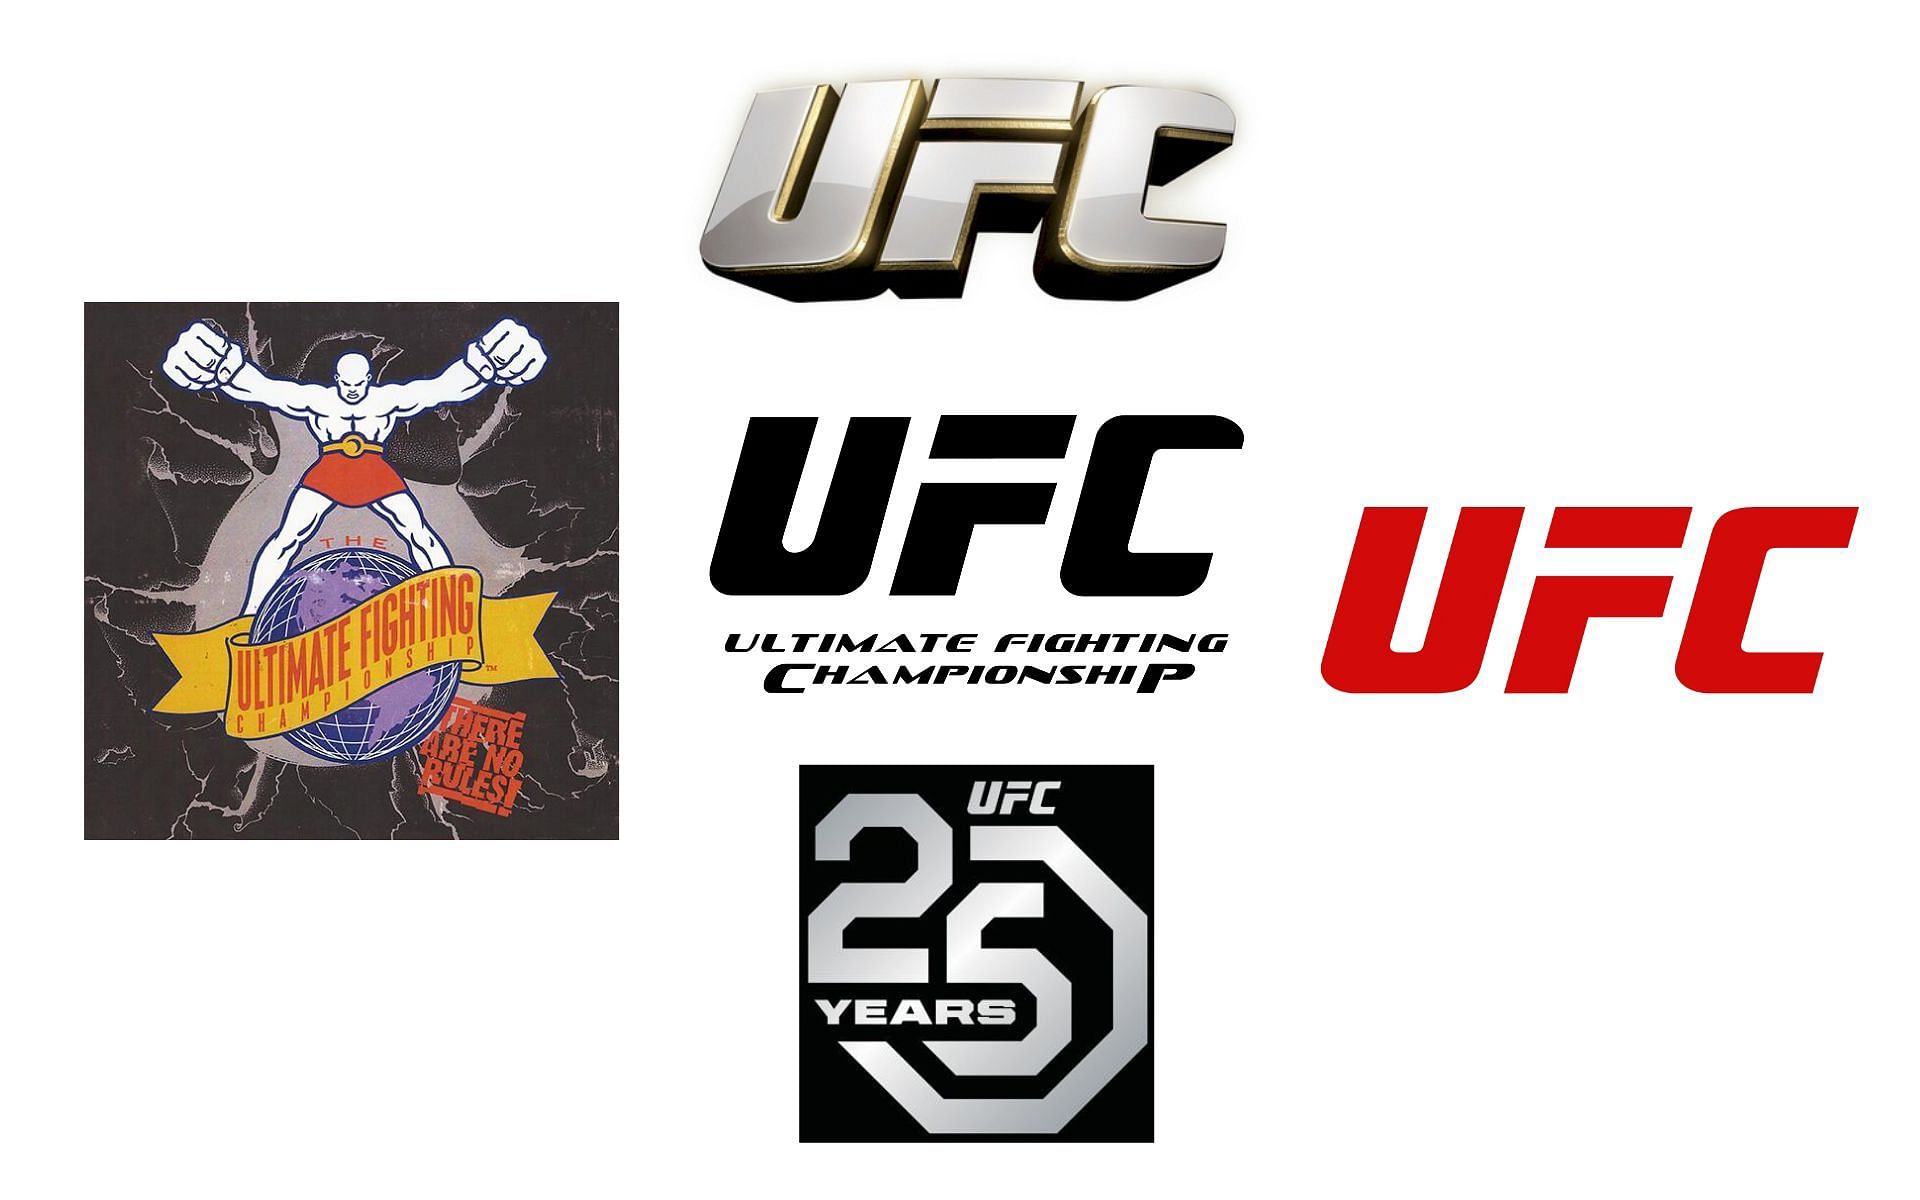 UFC logos through the ages [Images courtesy: www.logomyway.com, Wiki commons]